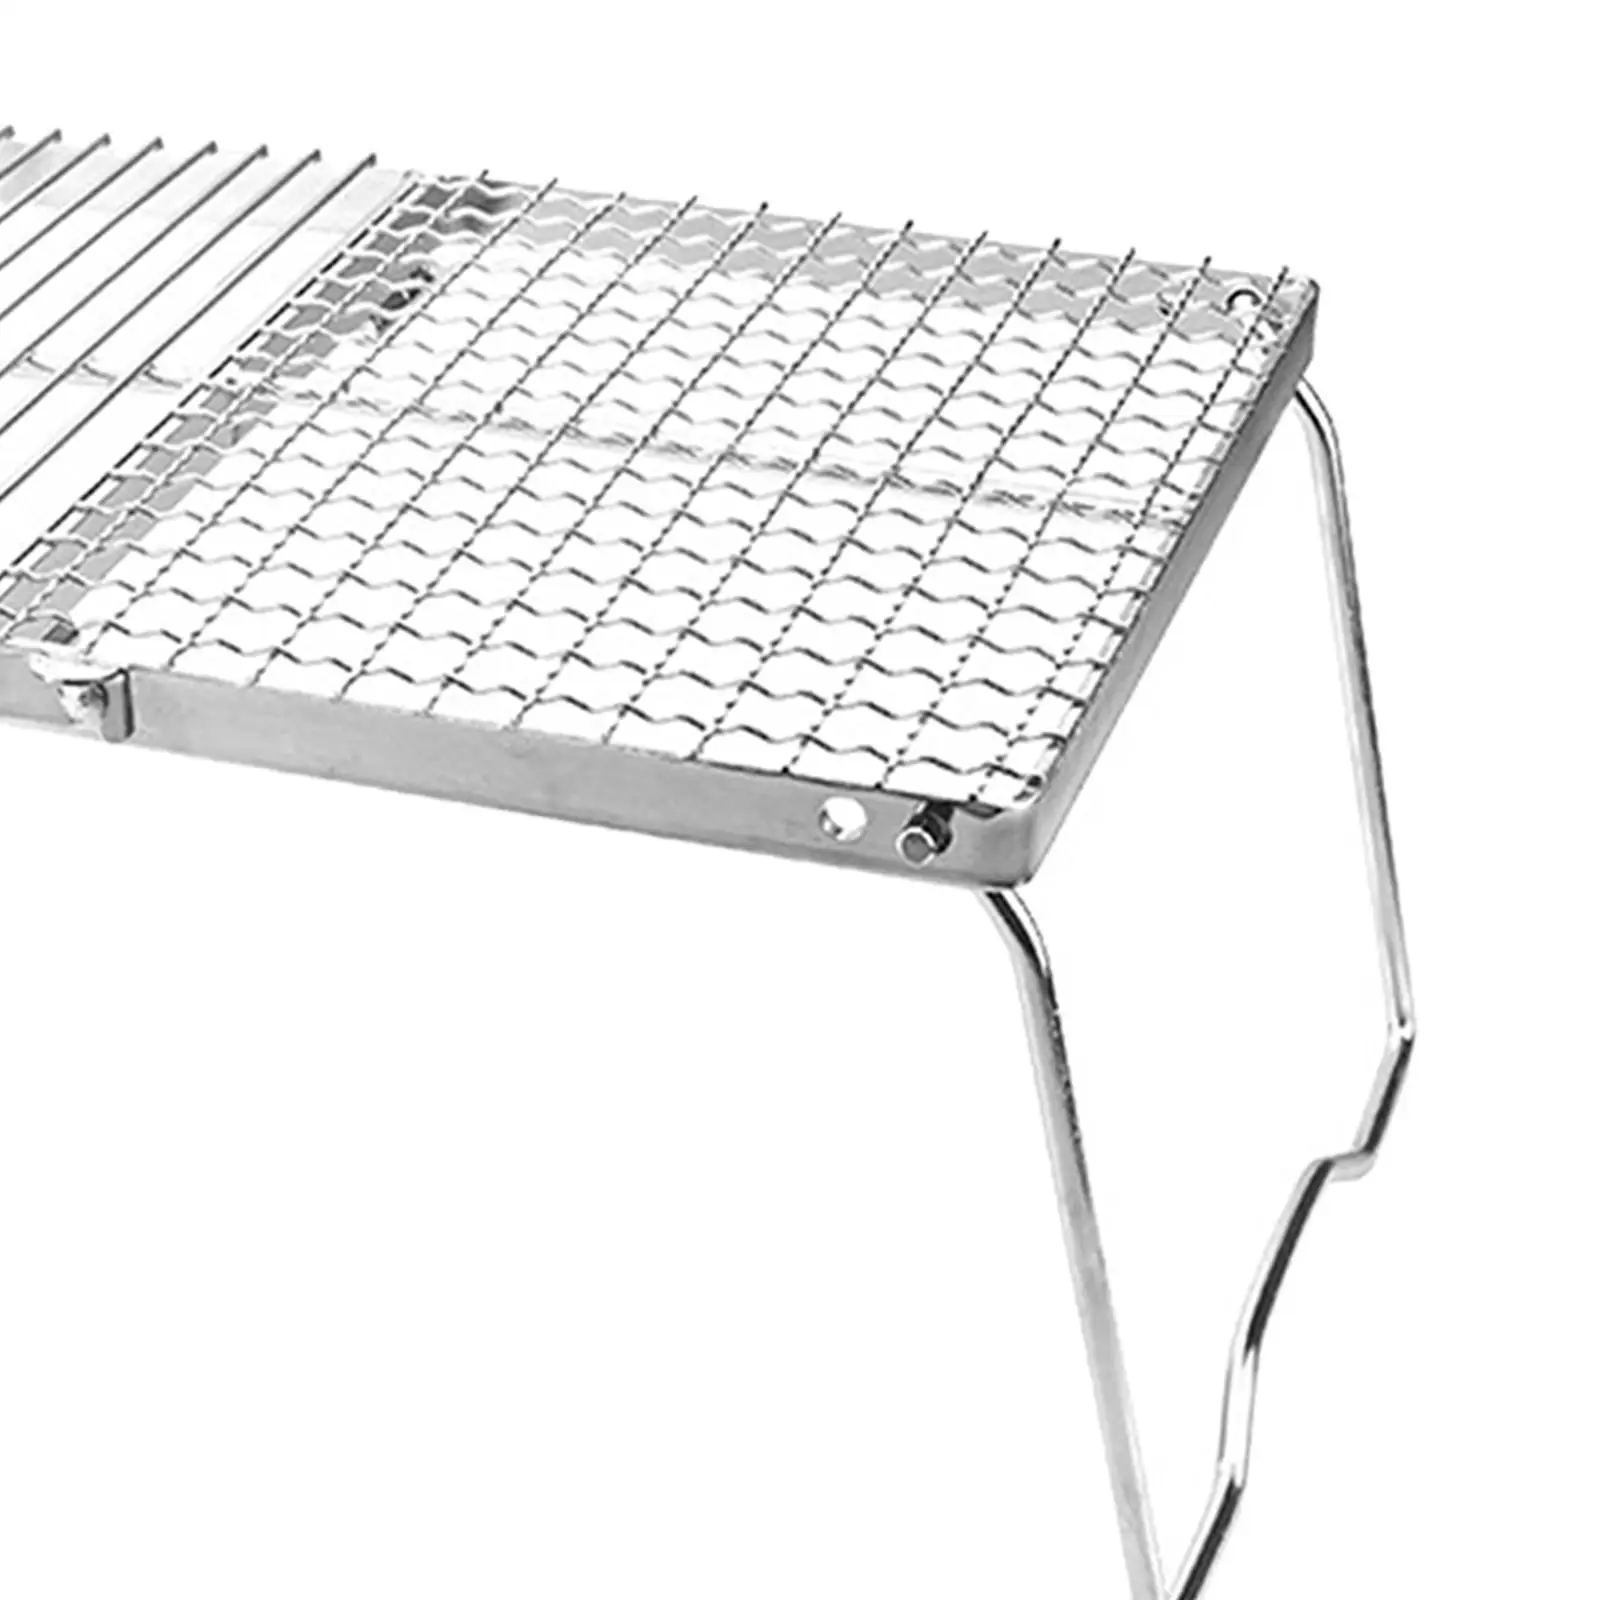 Campfire Grill Folding Barbecue Net Portable Stainless Steel Foldable BBQ Rack Mesh for Outdoor Travel Camping Hiking Backyard